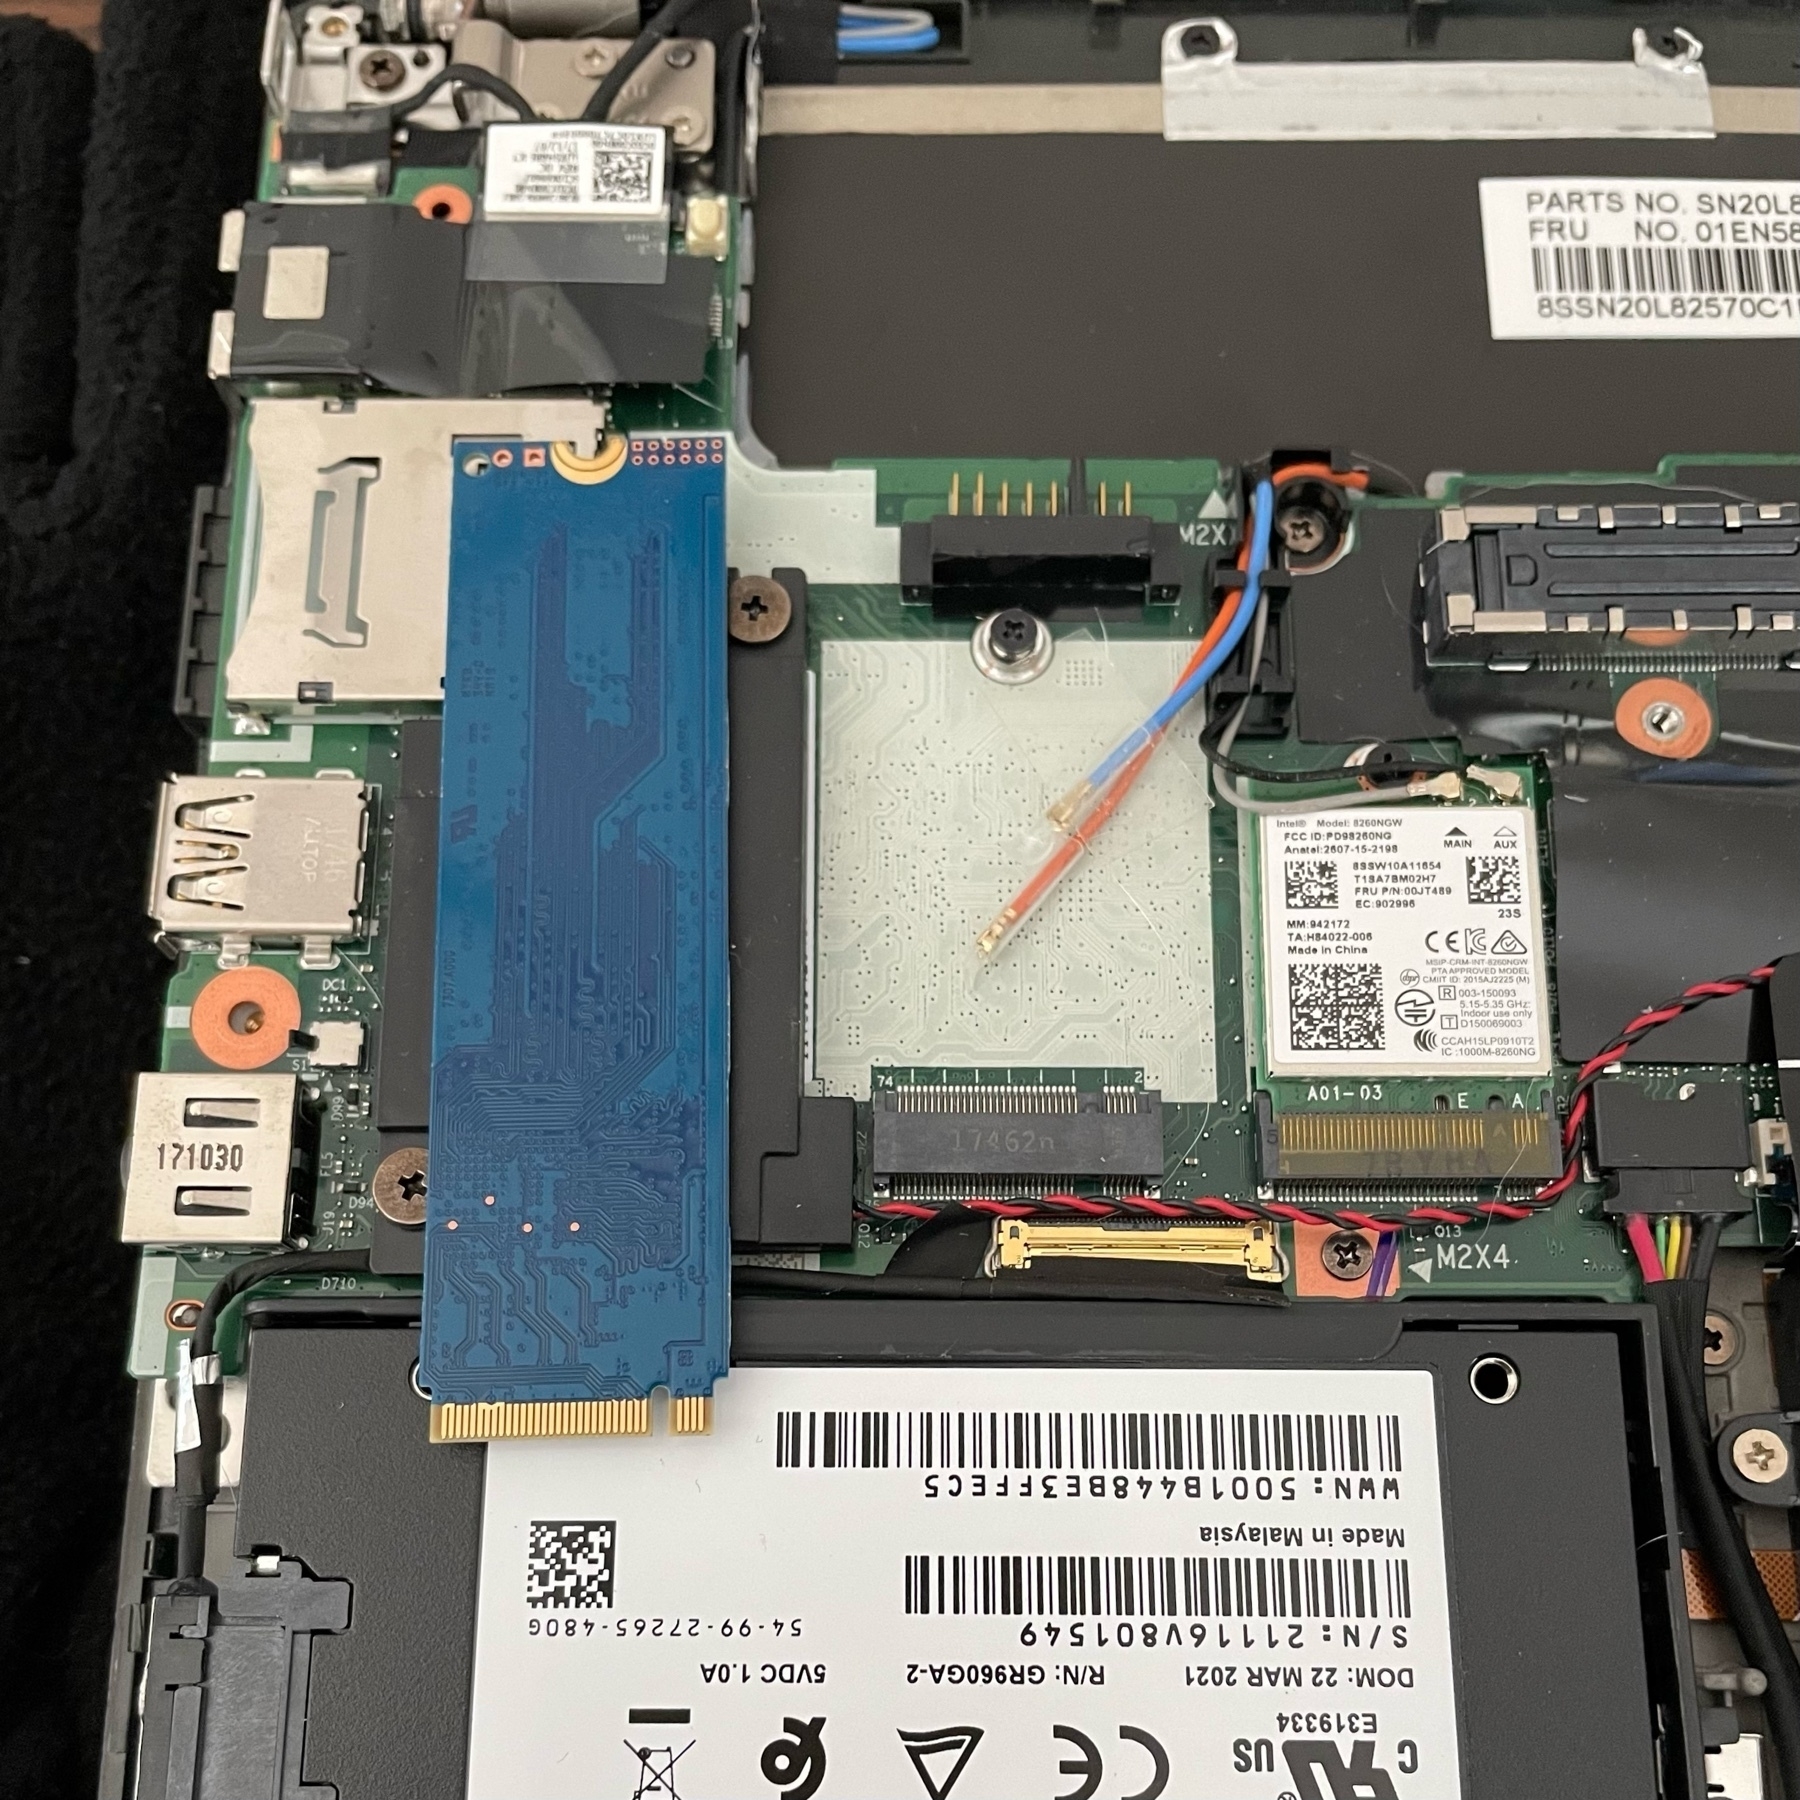 inside of thinkpad x270 showing an m.2 NVMe module that is too large to fit in the WLAN slot